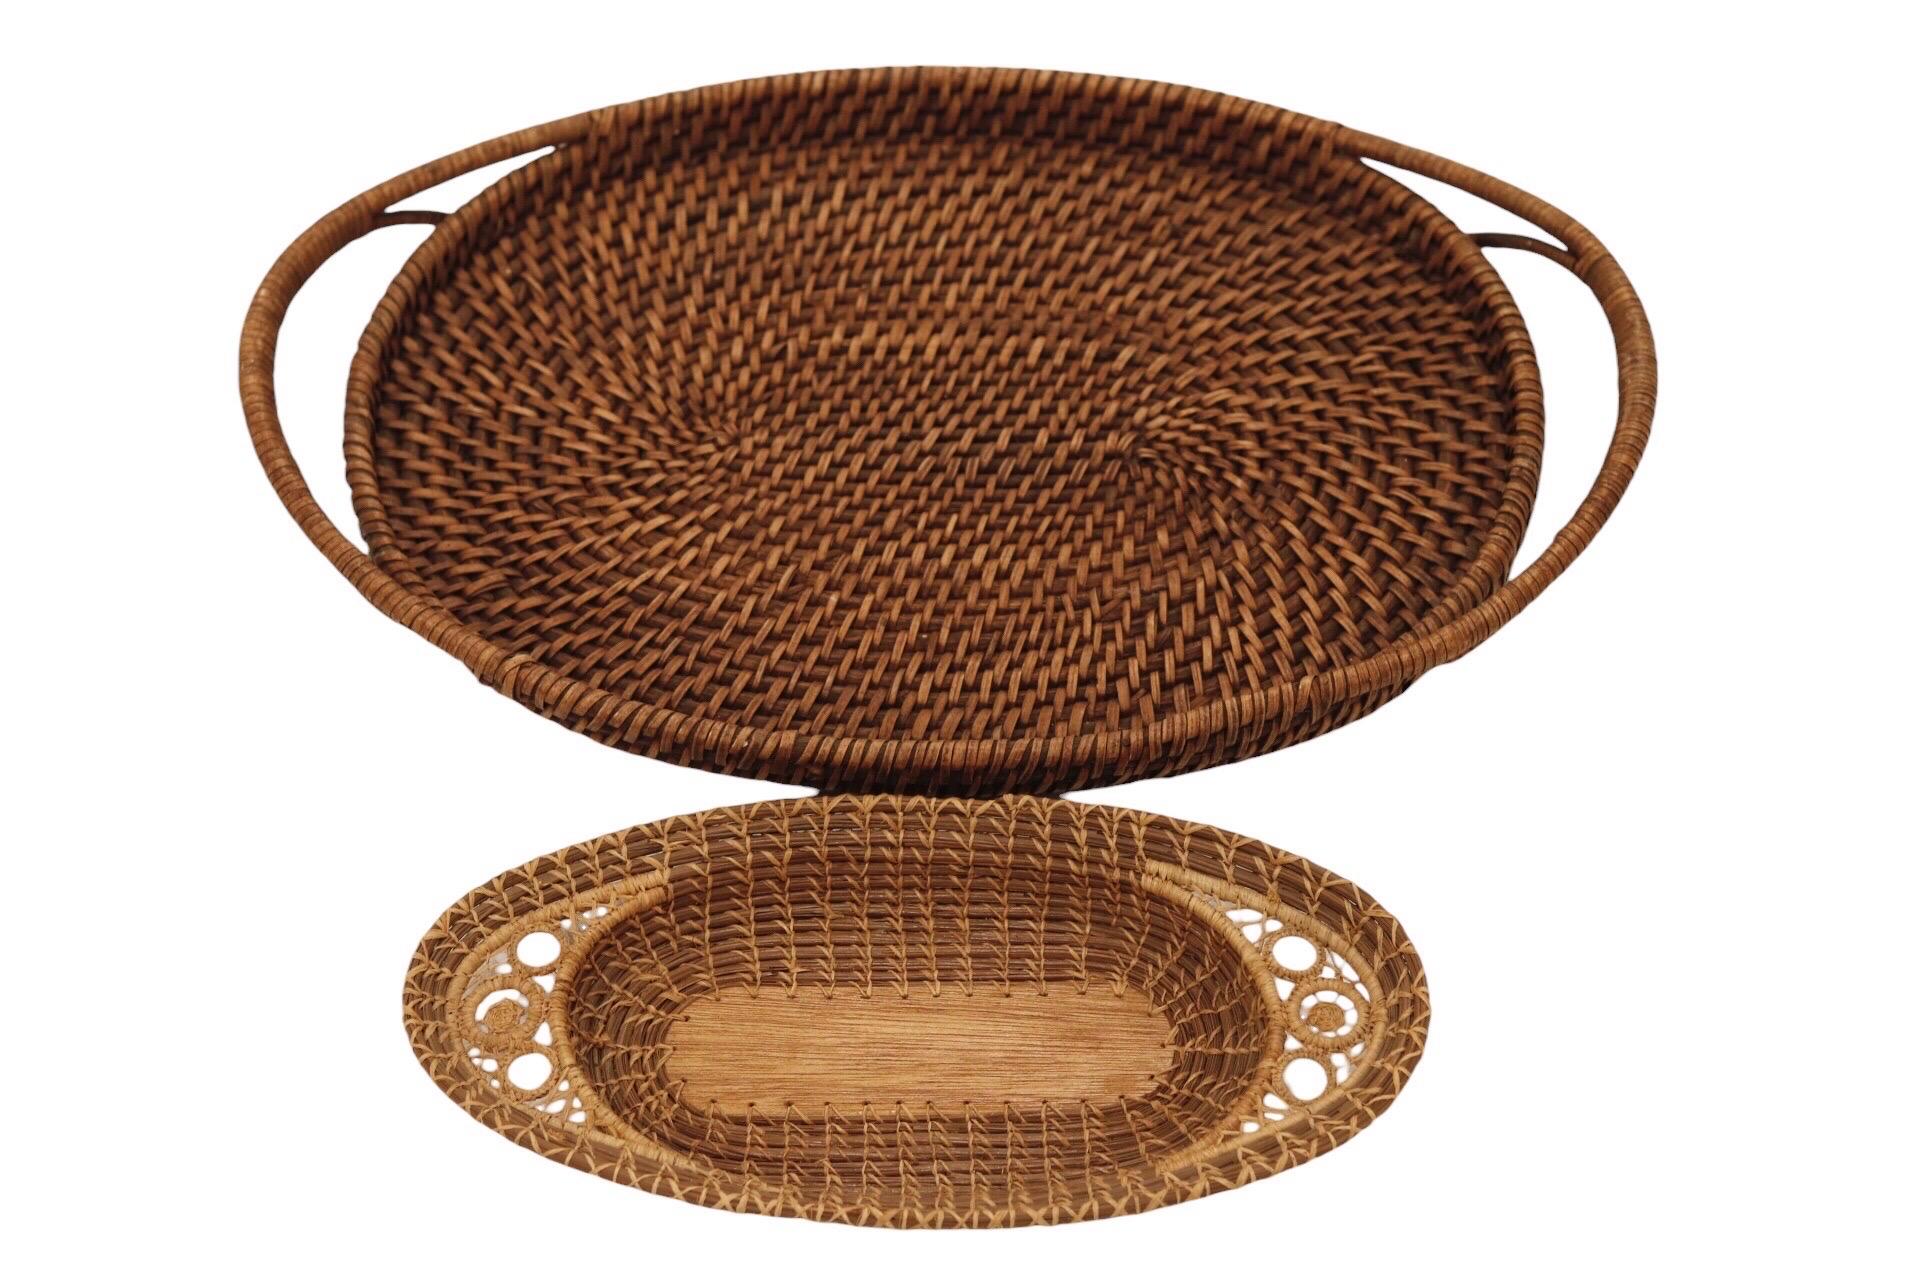 A set of two oval serving trays. The smaller is an antique pine needle tray, hand woven and decorated with hand knotted “sun” medallions at each end. The larger tray is a hand woven rattan, with rattan handles. Trays measure 21